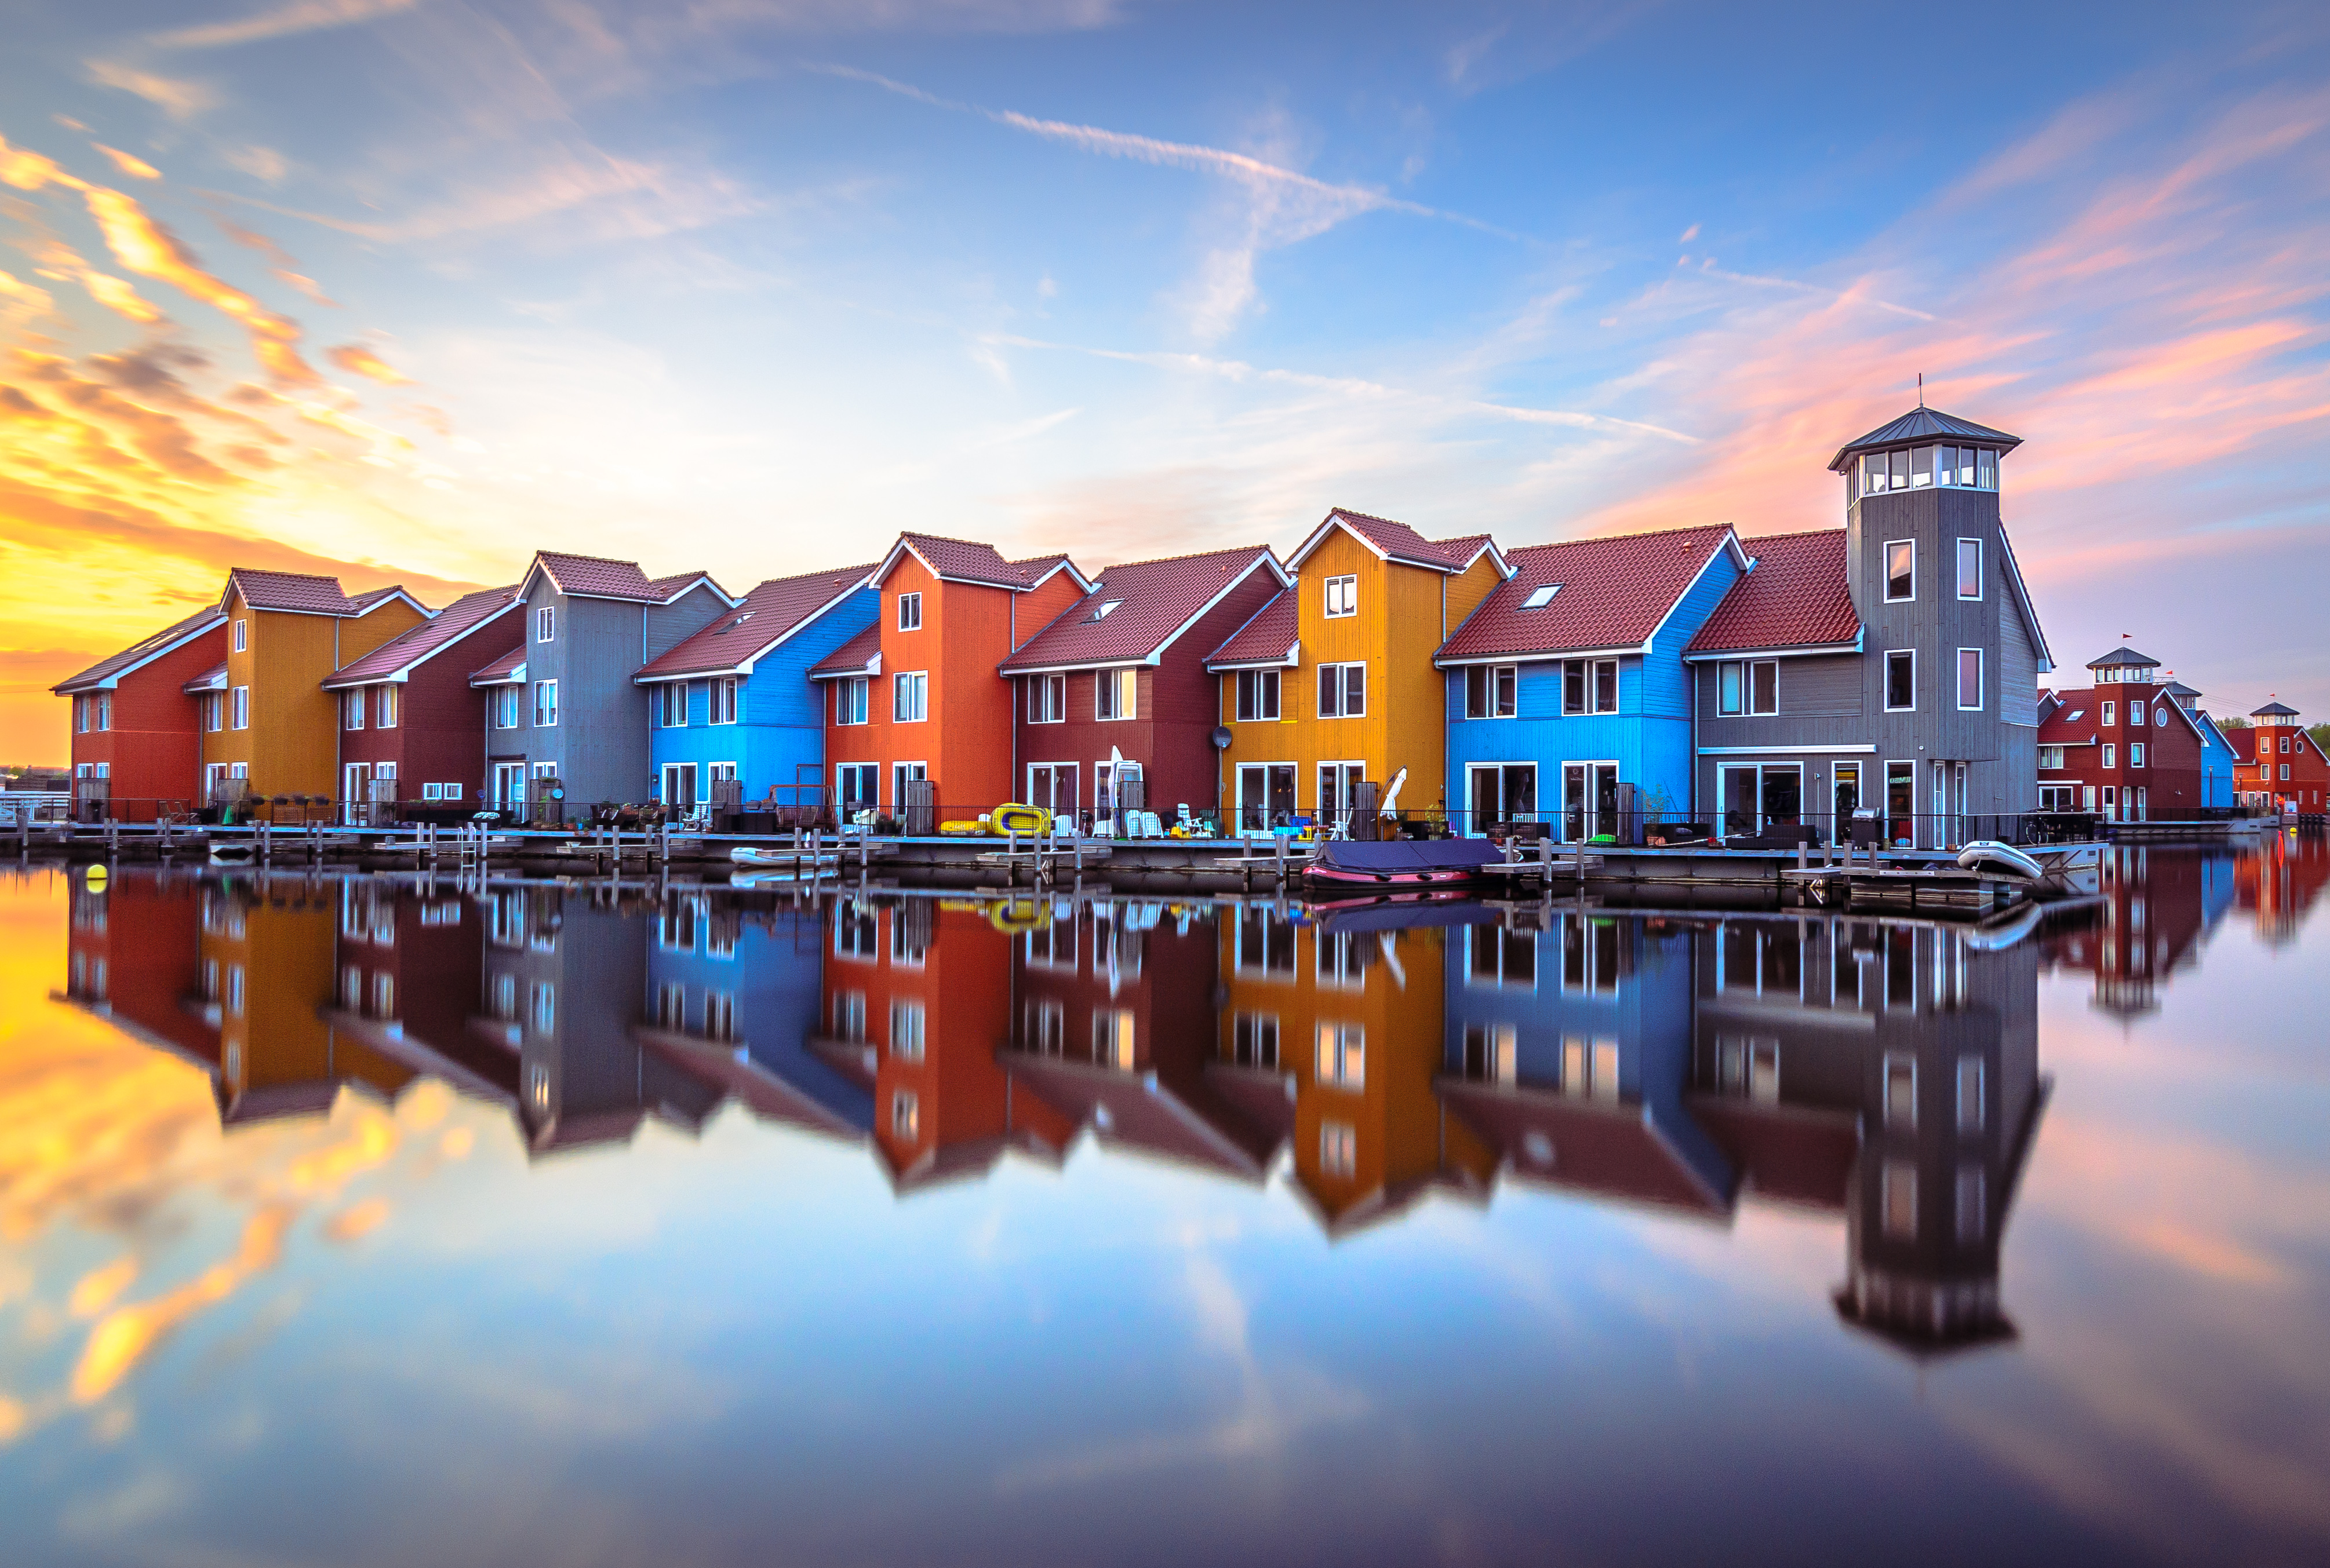 Wallpaper, sunset, holland, colors, architecture, buildings, saturated, Nikon, North, wideangle, tokina, netherland, Groningen, waterside, coloredhouses, longexpo, innamoramento, d7000 4020x2706